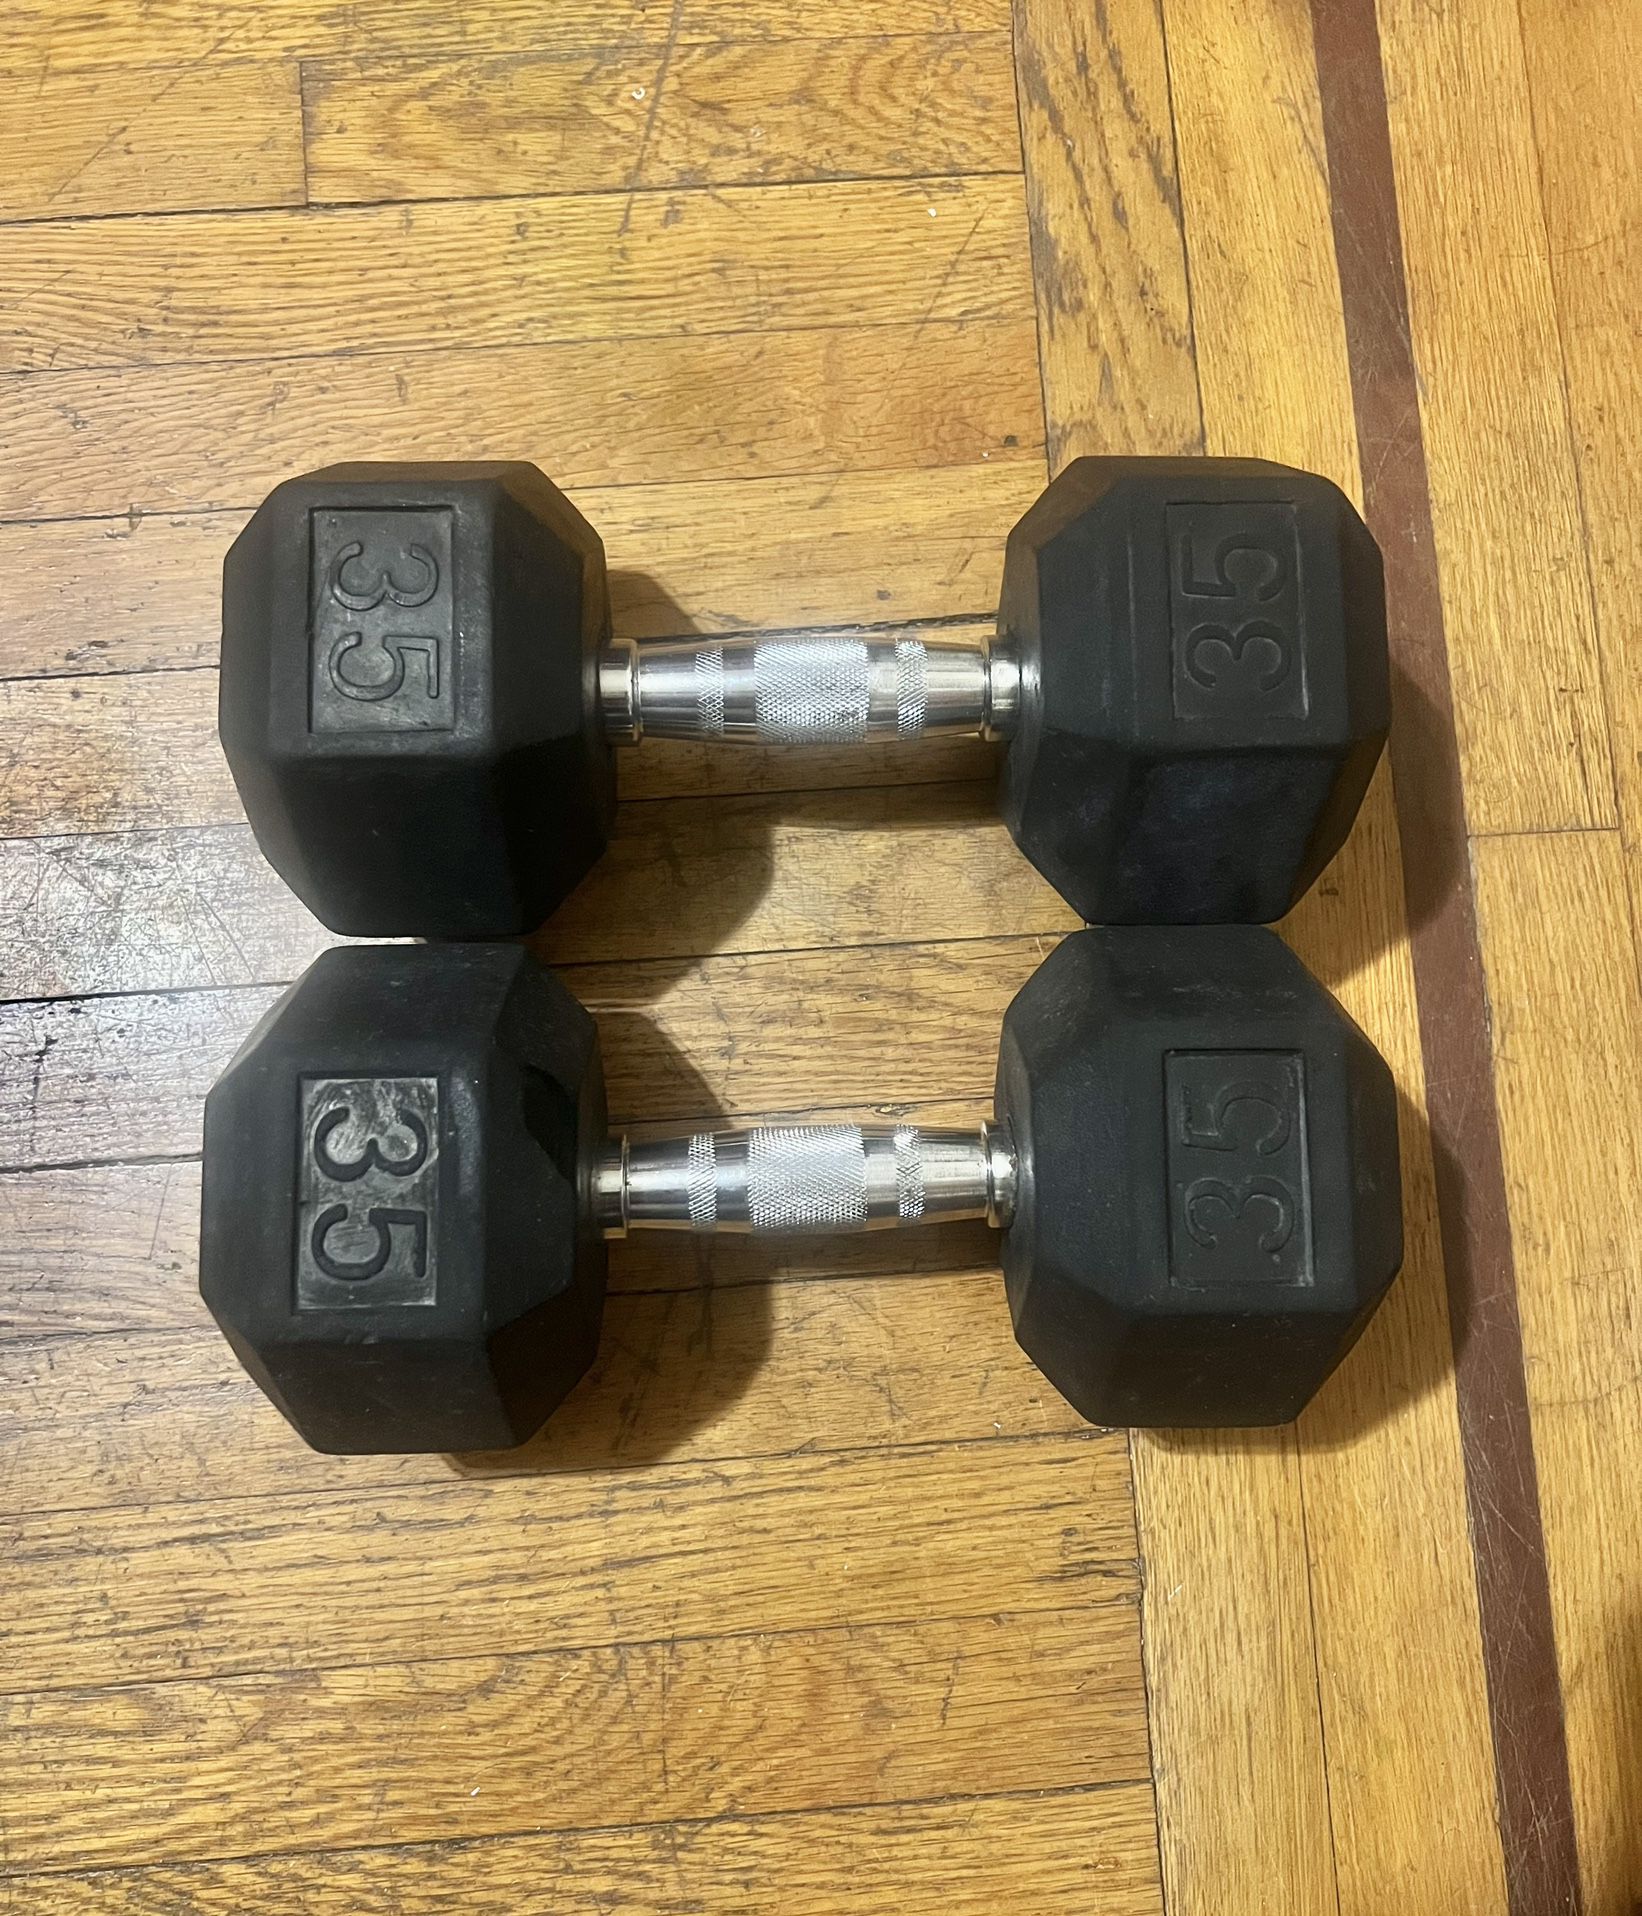 2 X 35 lbs…Total 70 Pounds …Rubber And Chrome Hex Dumbbells Weights…I’m Located In Bayside  Queens